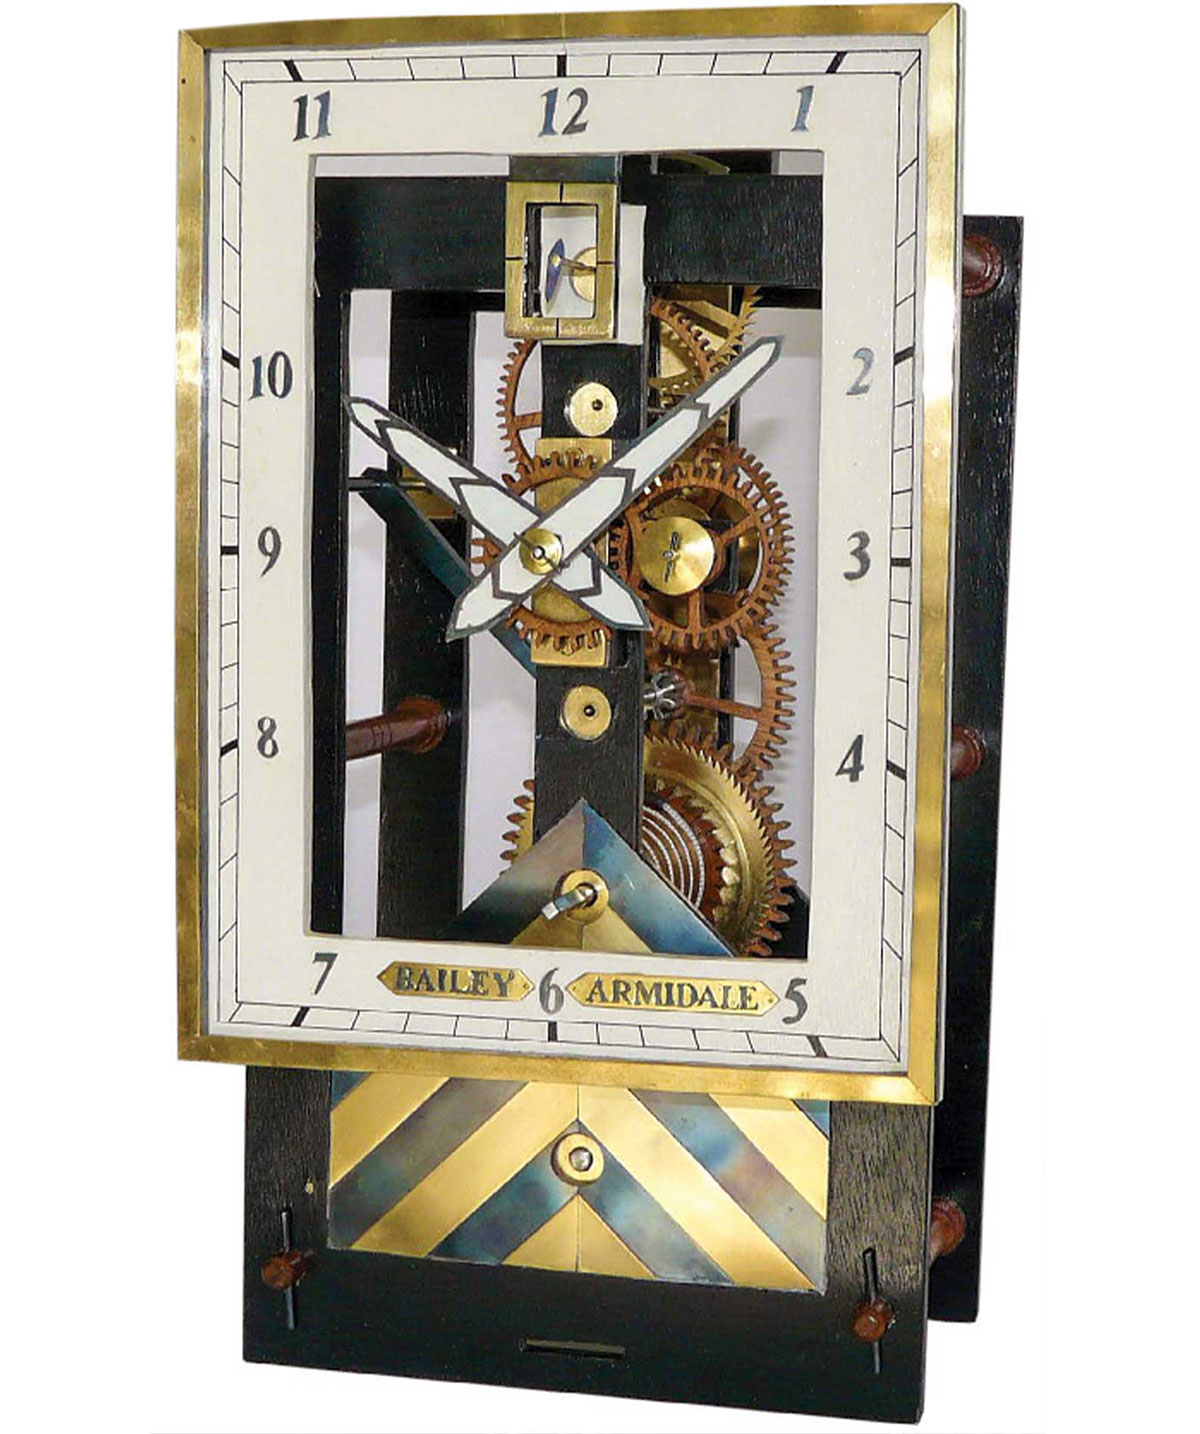 View of the dial, hands, seconds dial, and the chevron decoration of brass and blued steel on the front plate